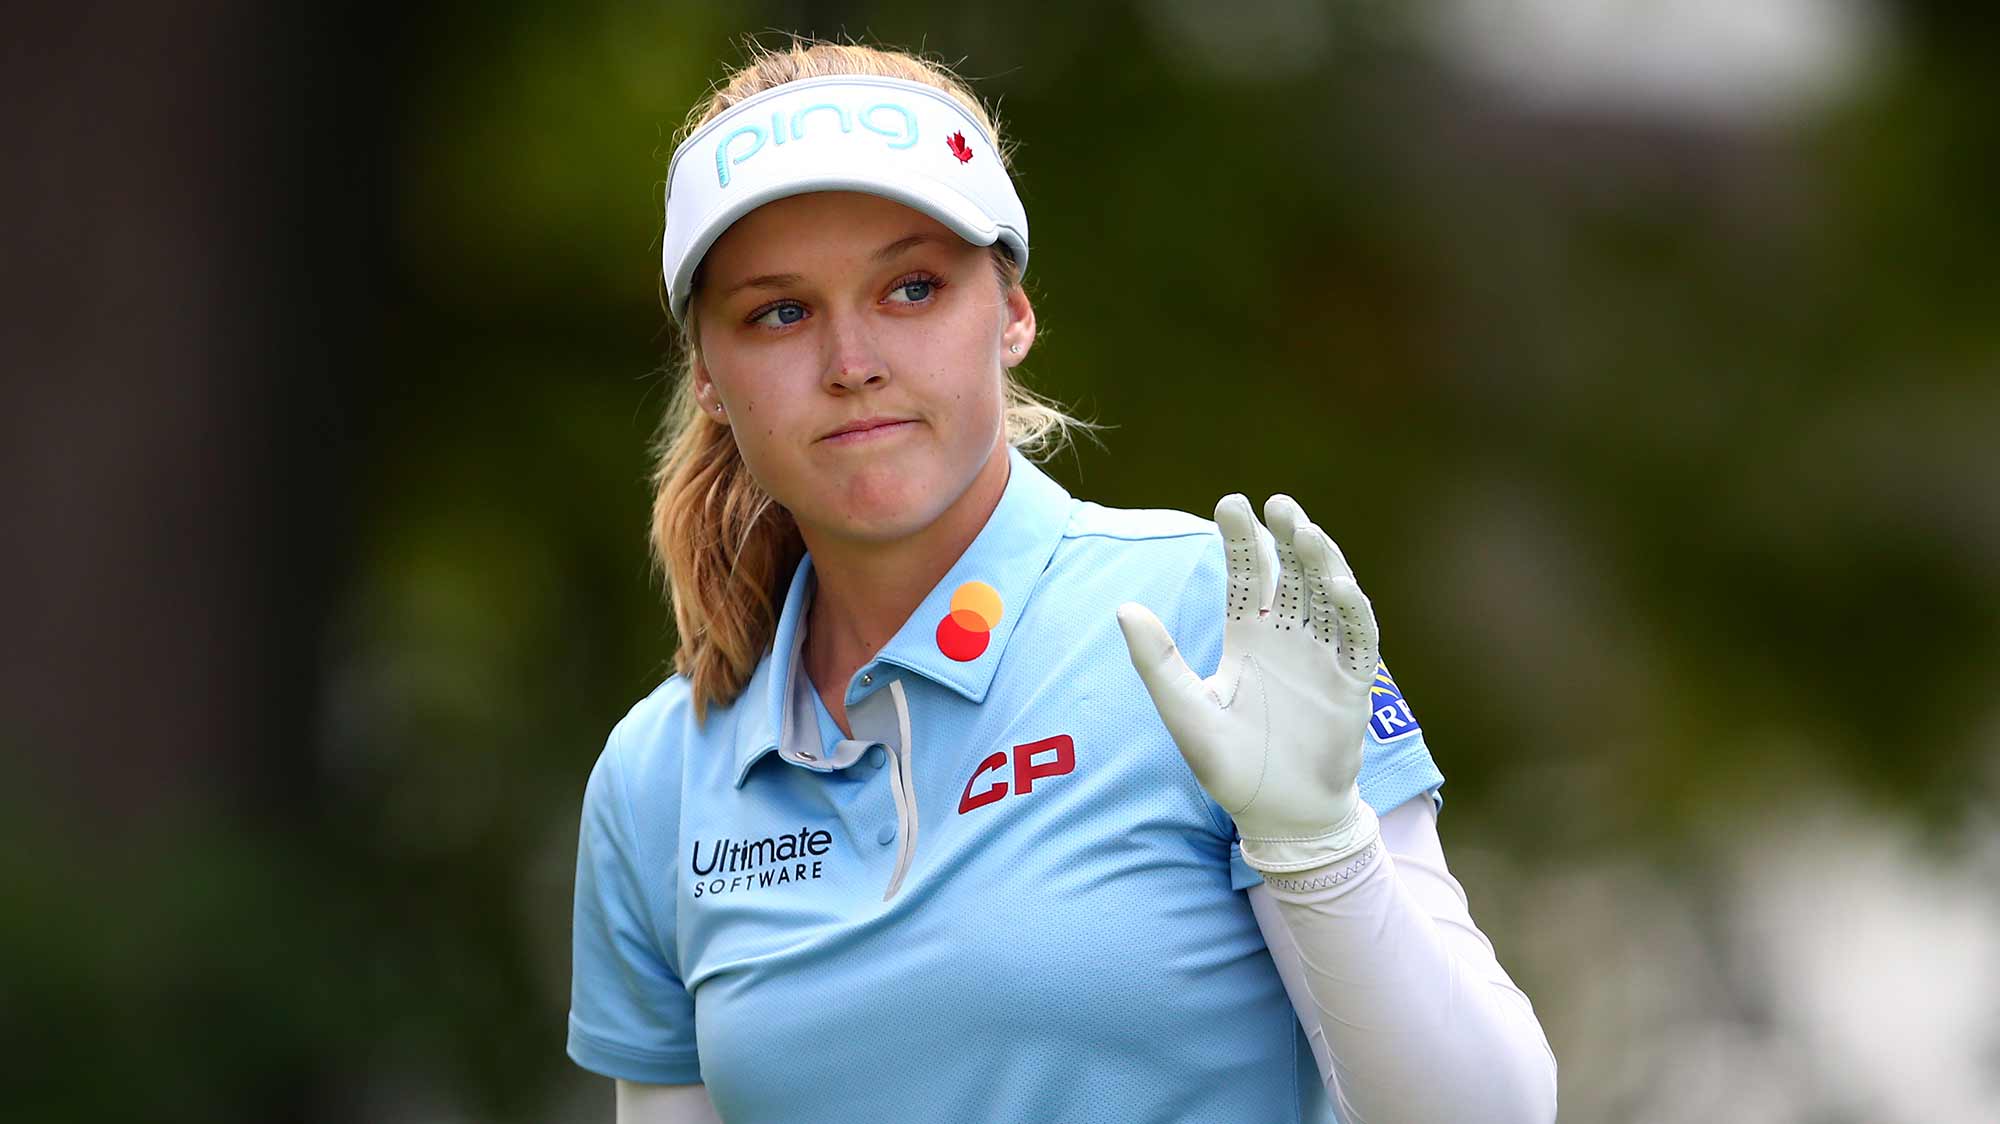 Brooke Henderson of Canada acknowledges the crowd prior to teeing off on the 1st hole during the third round of the CP Women's Open at Magna Golf Club on August 24, 2019 in Aurora, Canada